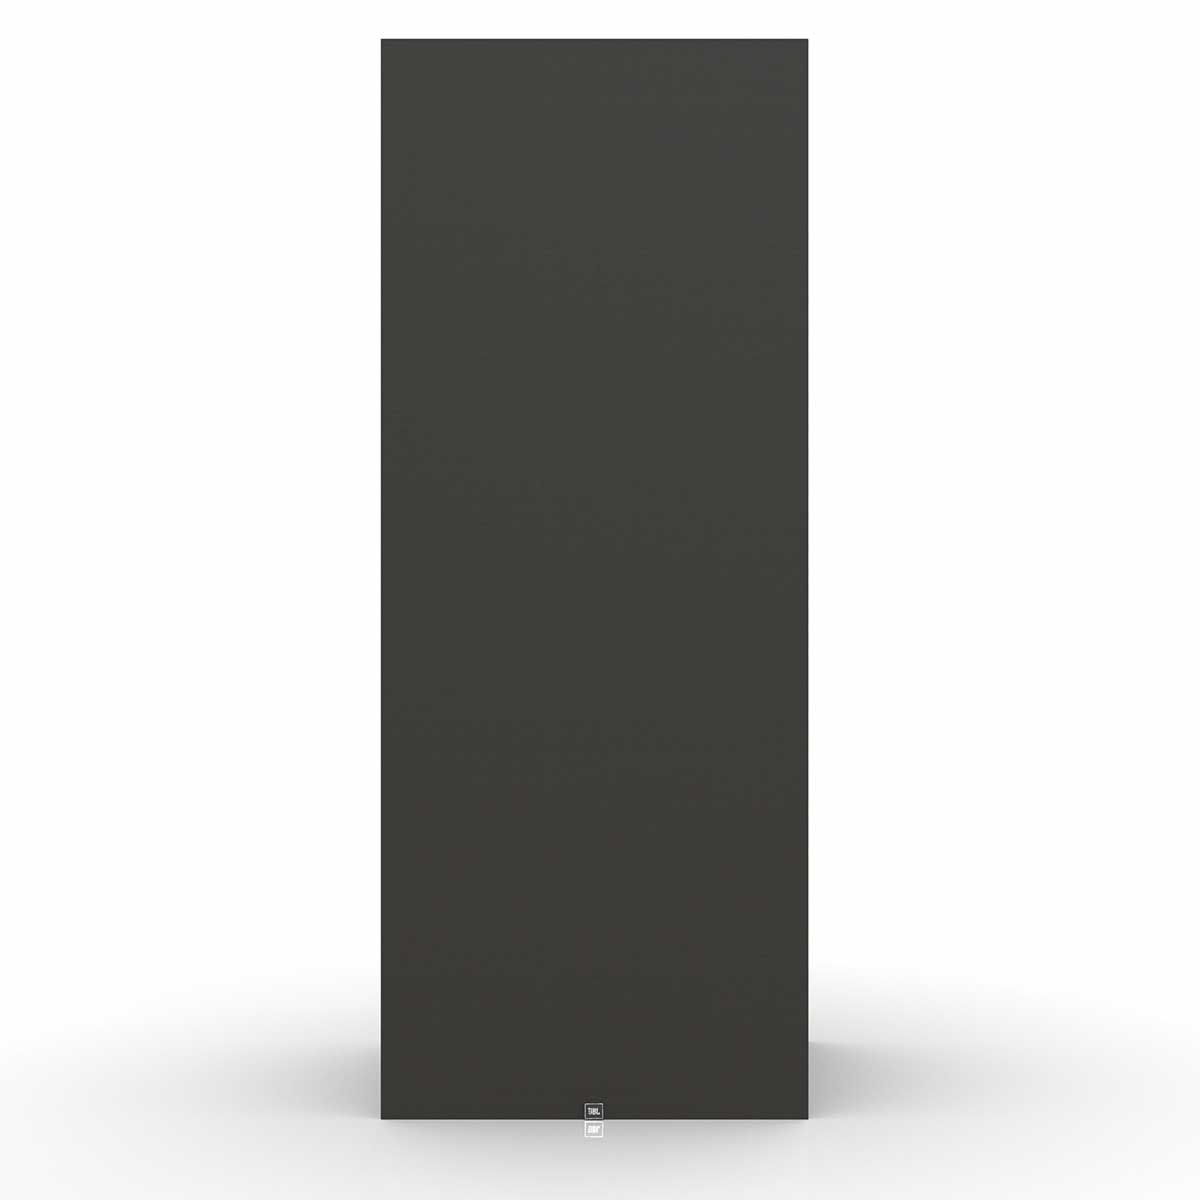 JBL Synthesis SCL-1 2-Way LCR Home Theater Speaker, Black, front with grille